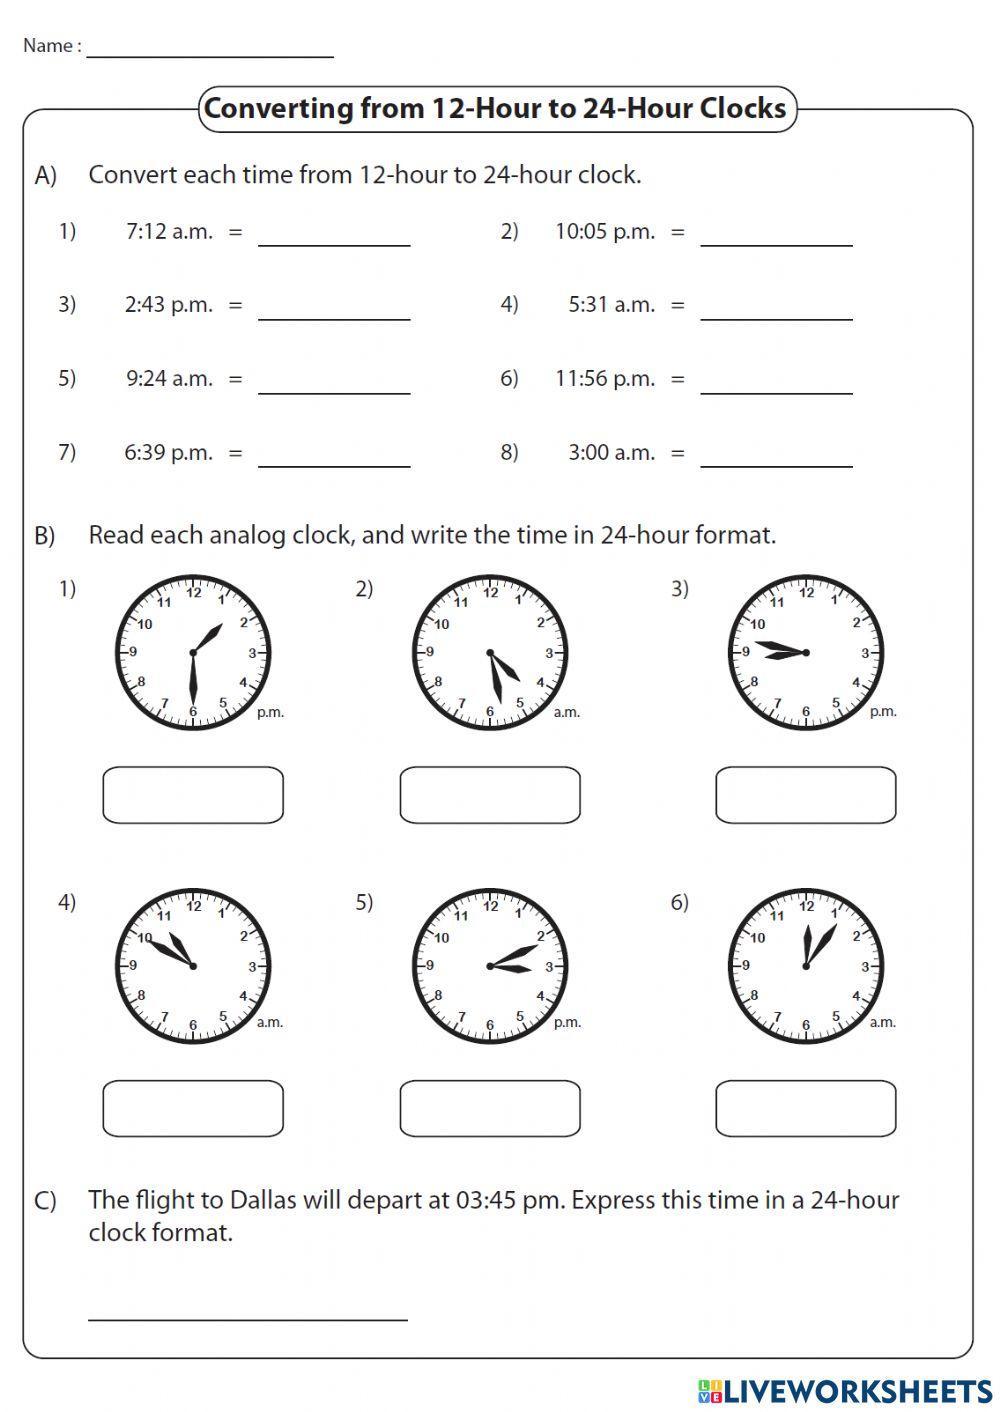 Converting from 12-hour to 24-hour clocks